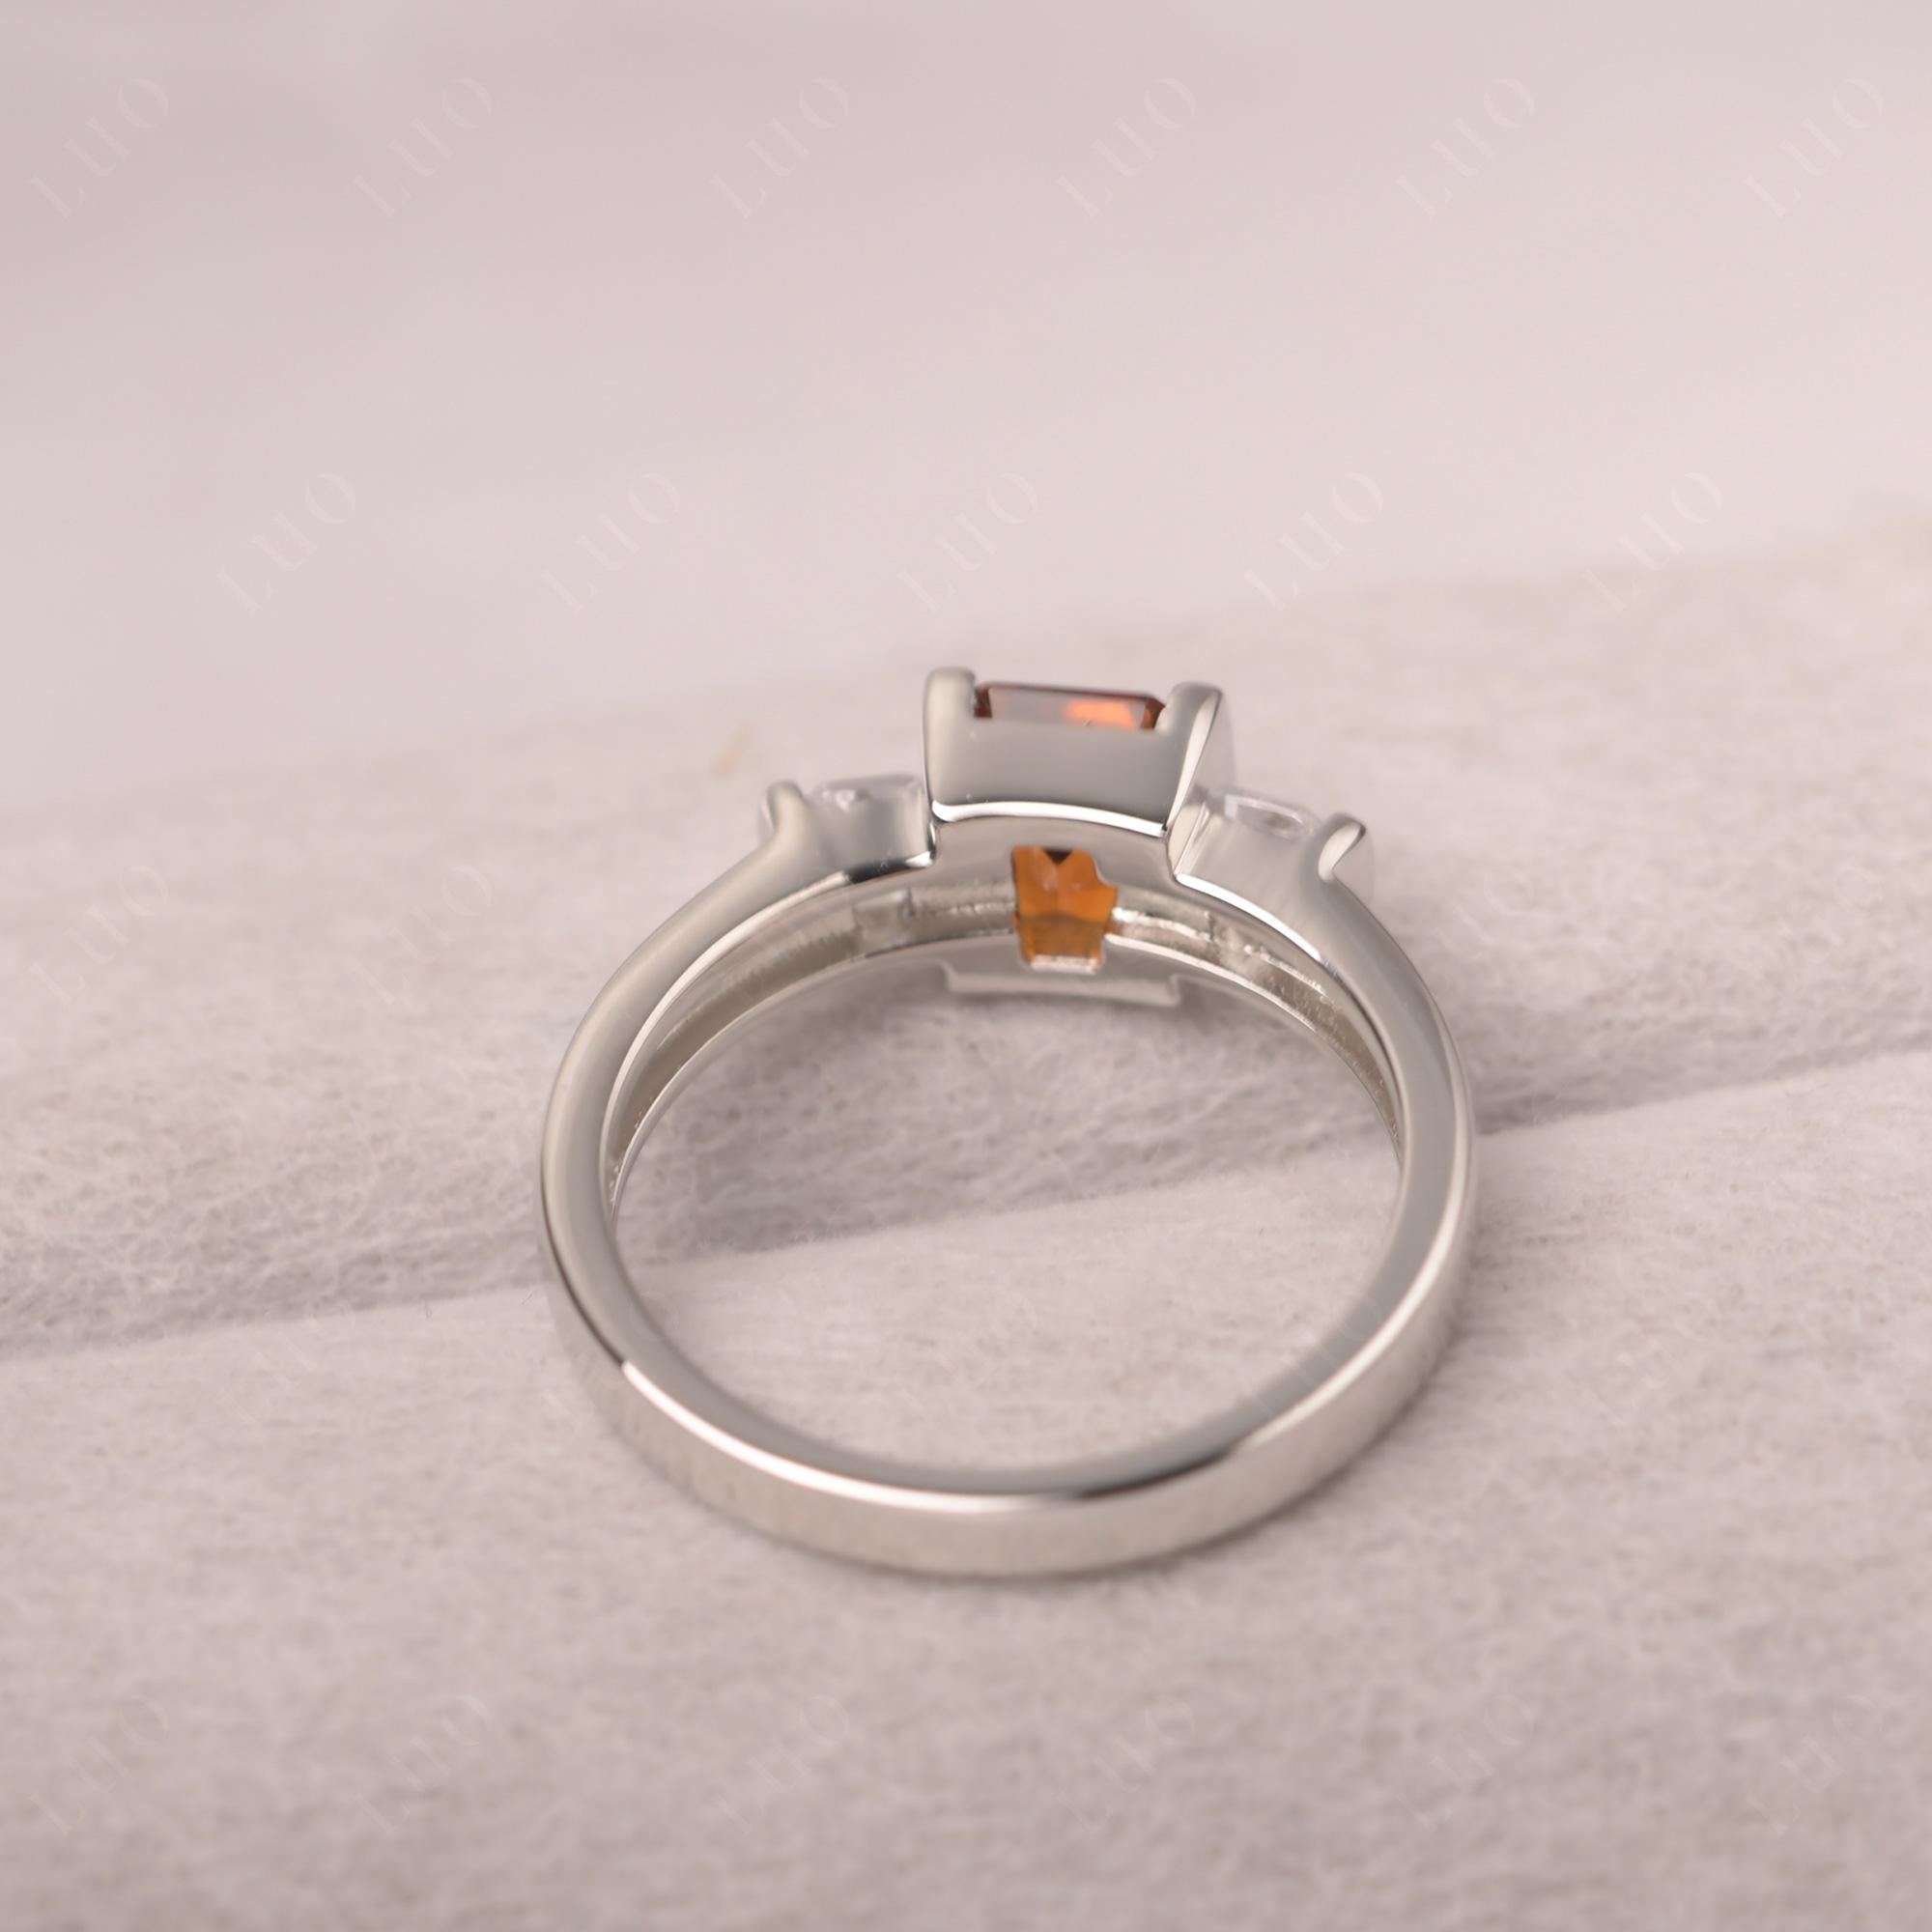 Vintage Citrine Ring Bezel Set Emerald Cut Ring - LUO Jewelry